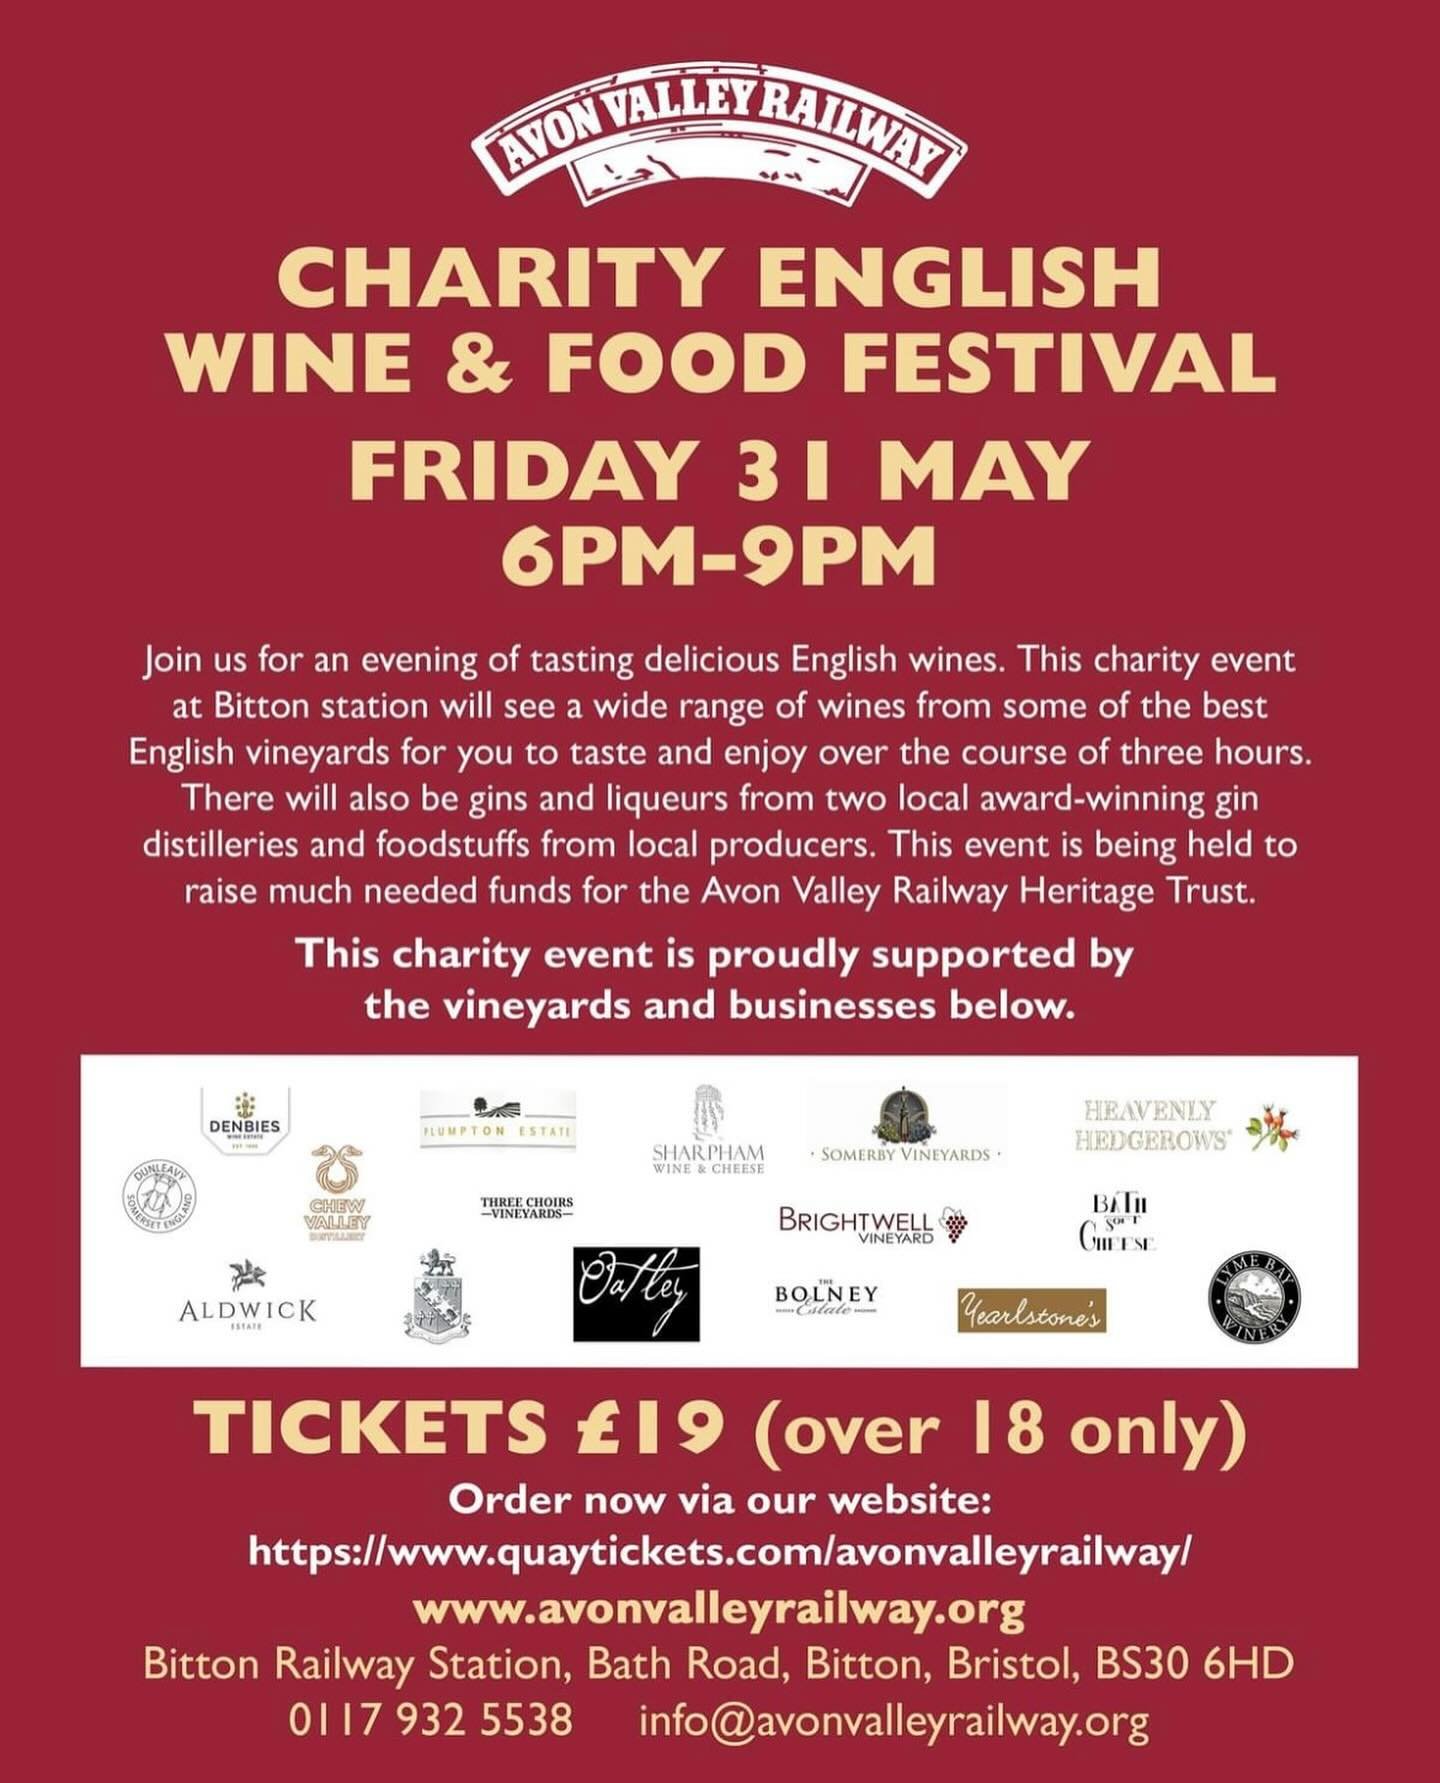 Looking forward to taking part in this event tomorrow evening. 
We&rsquo;ll have a stall there along with @bathsoftcheese and lots of lovely English wine merchants.